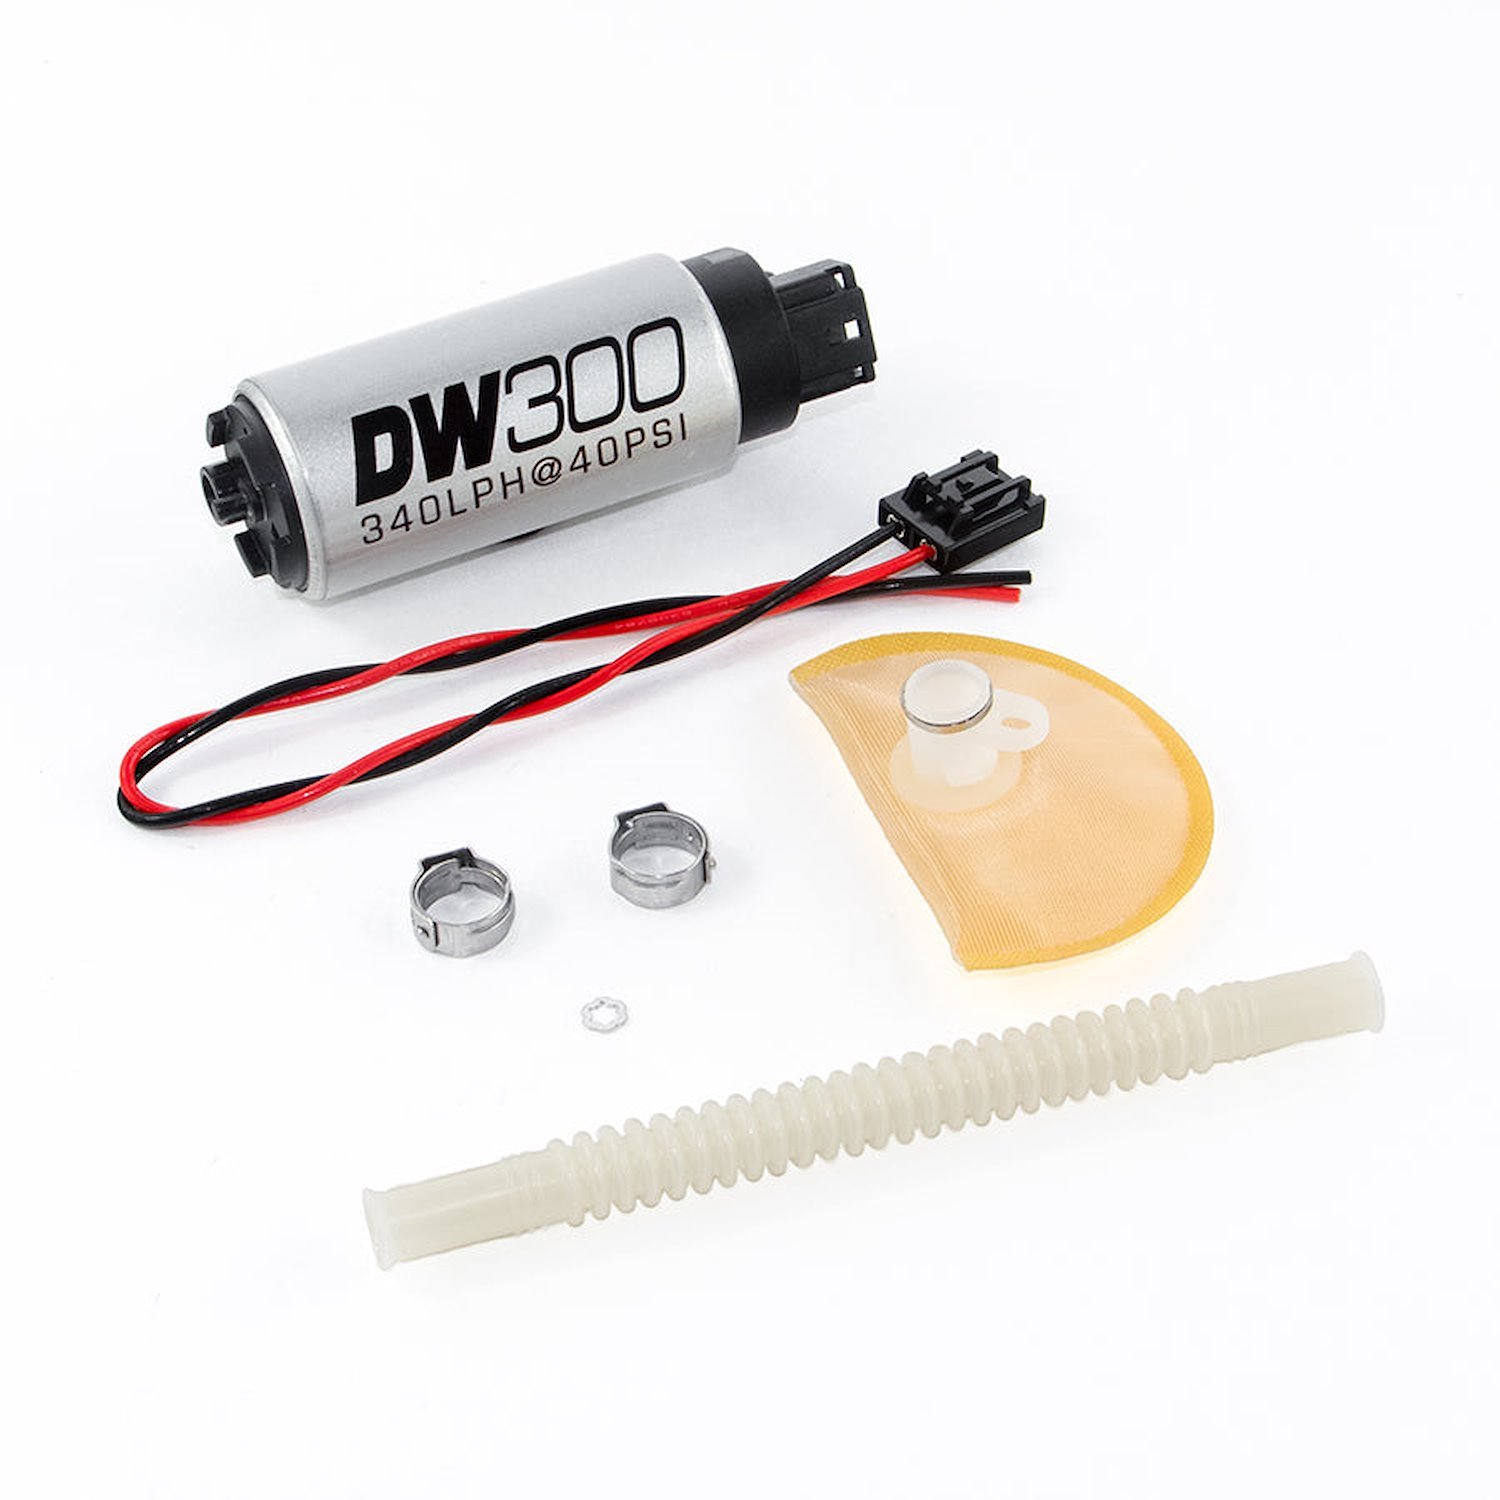 93011020 DW300 series 340lph in-tank fuel pump w/ install kit for Nissan 370z 2009-2015 and Infiniti G37 2008-2014